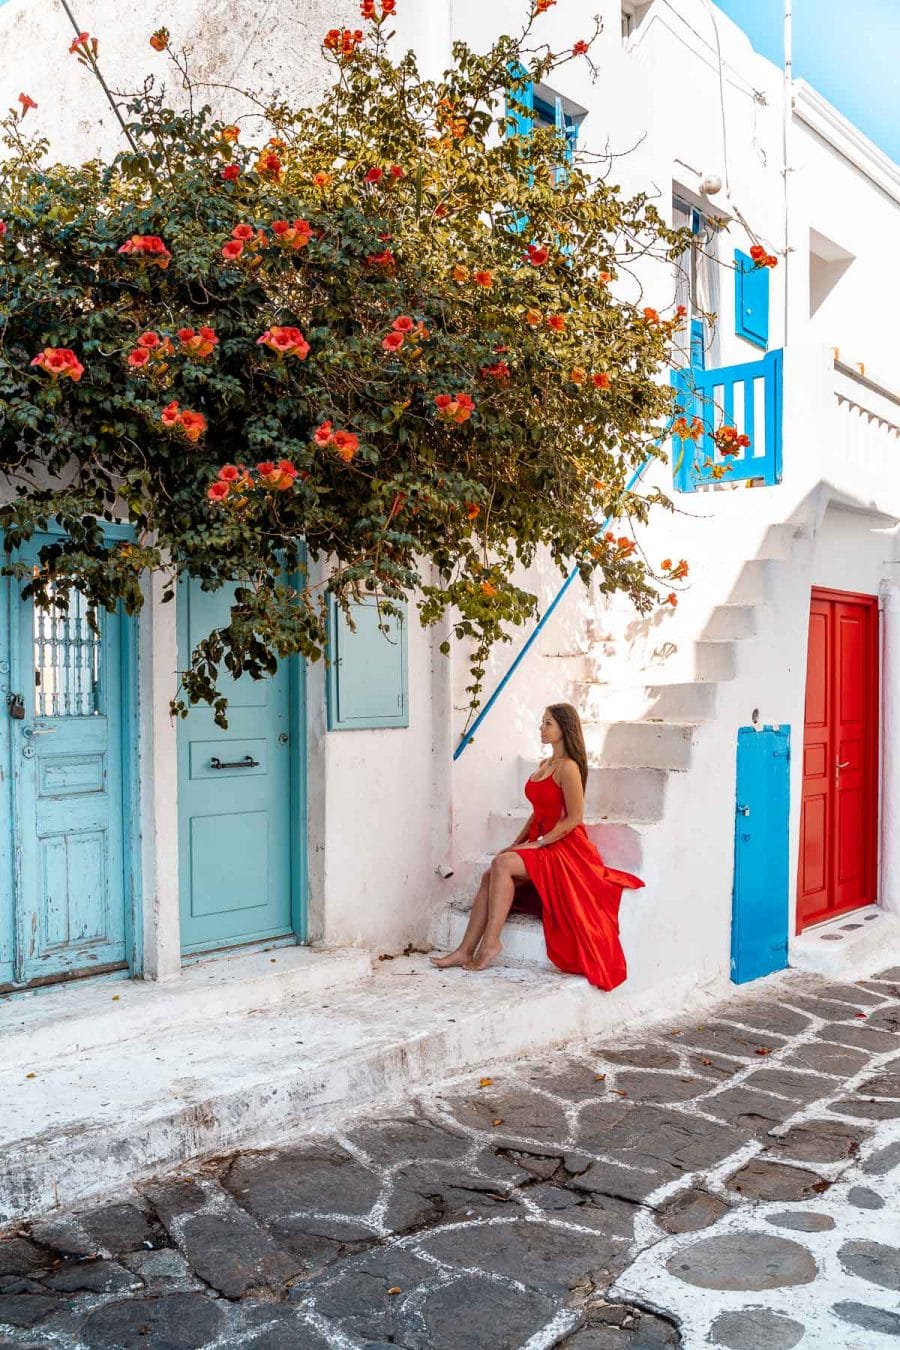 Girl in a red dress sitting on a stair at the turquoise door in Mykonos